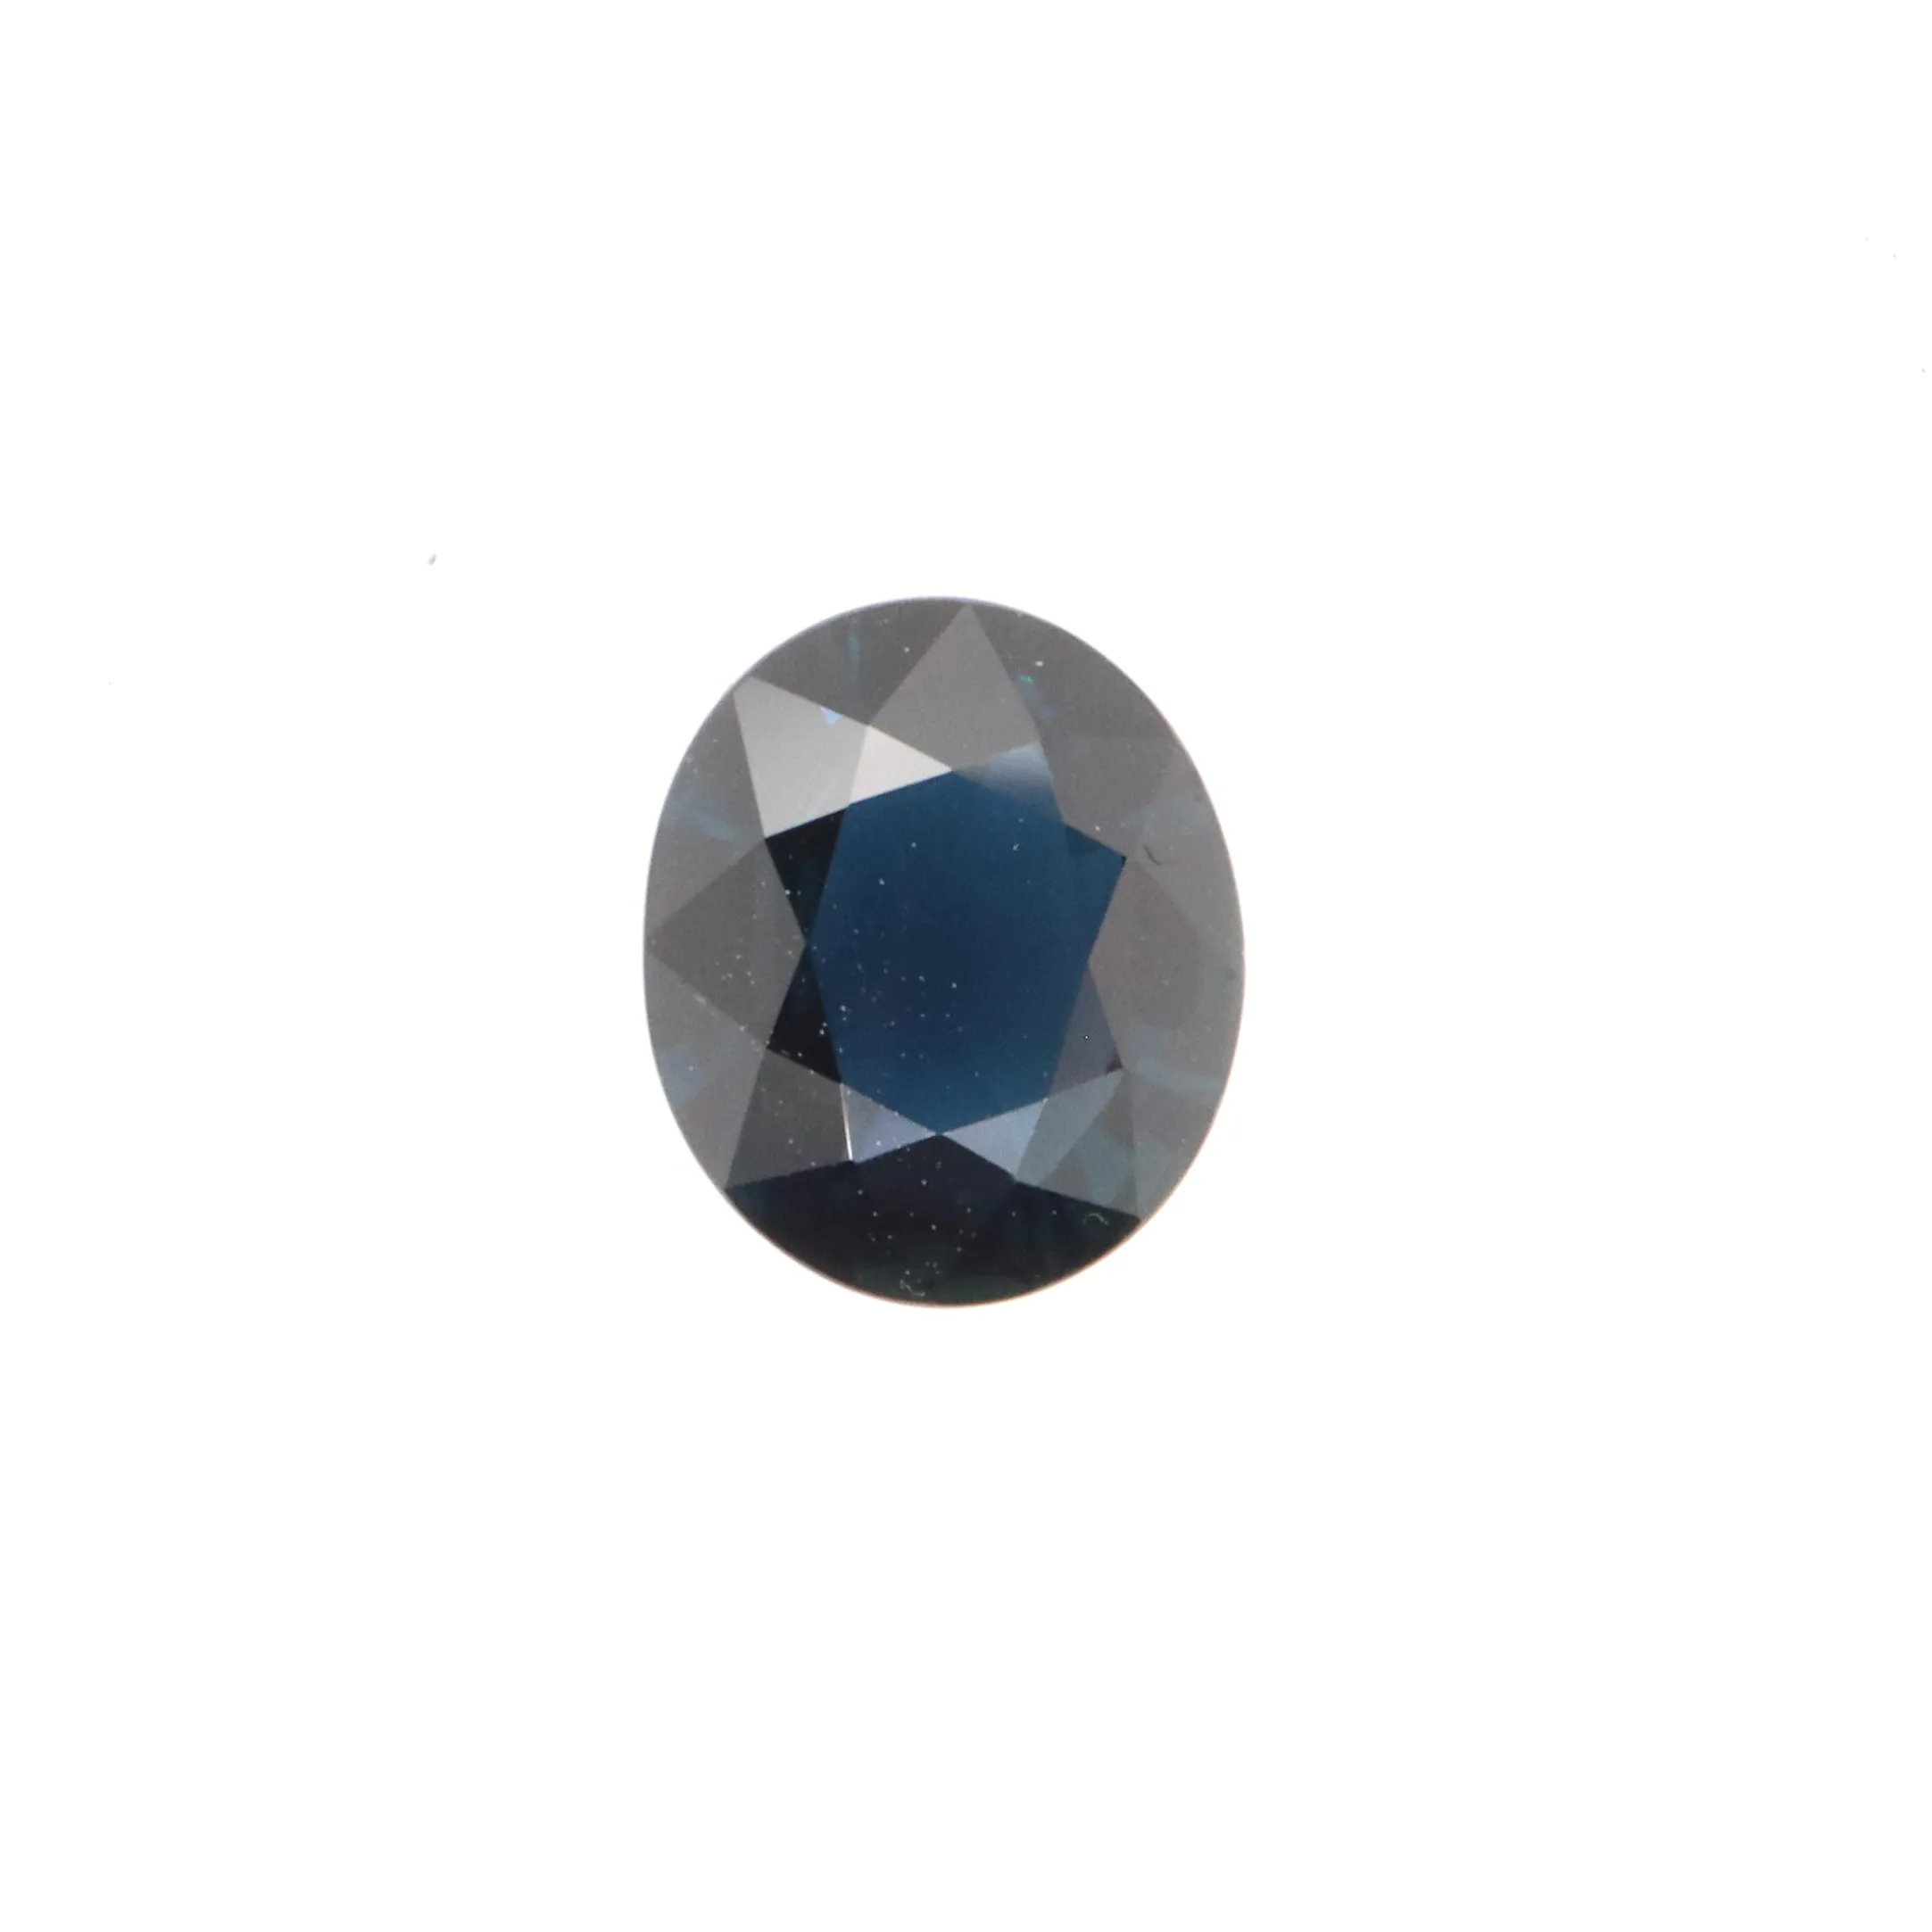 Genuine Loose Precious Natural Unheat Oval Shape Blue Sapphire Gemstone 2.25 ct. Custom Jewelry Setting Available by SVS Jewelry